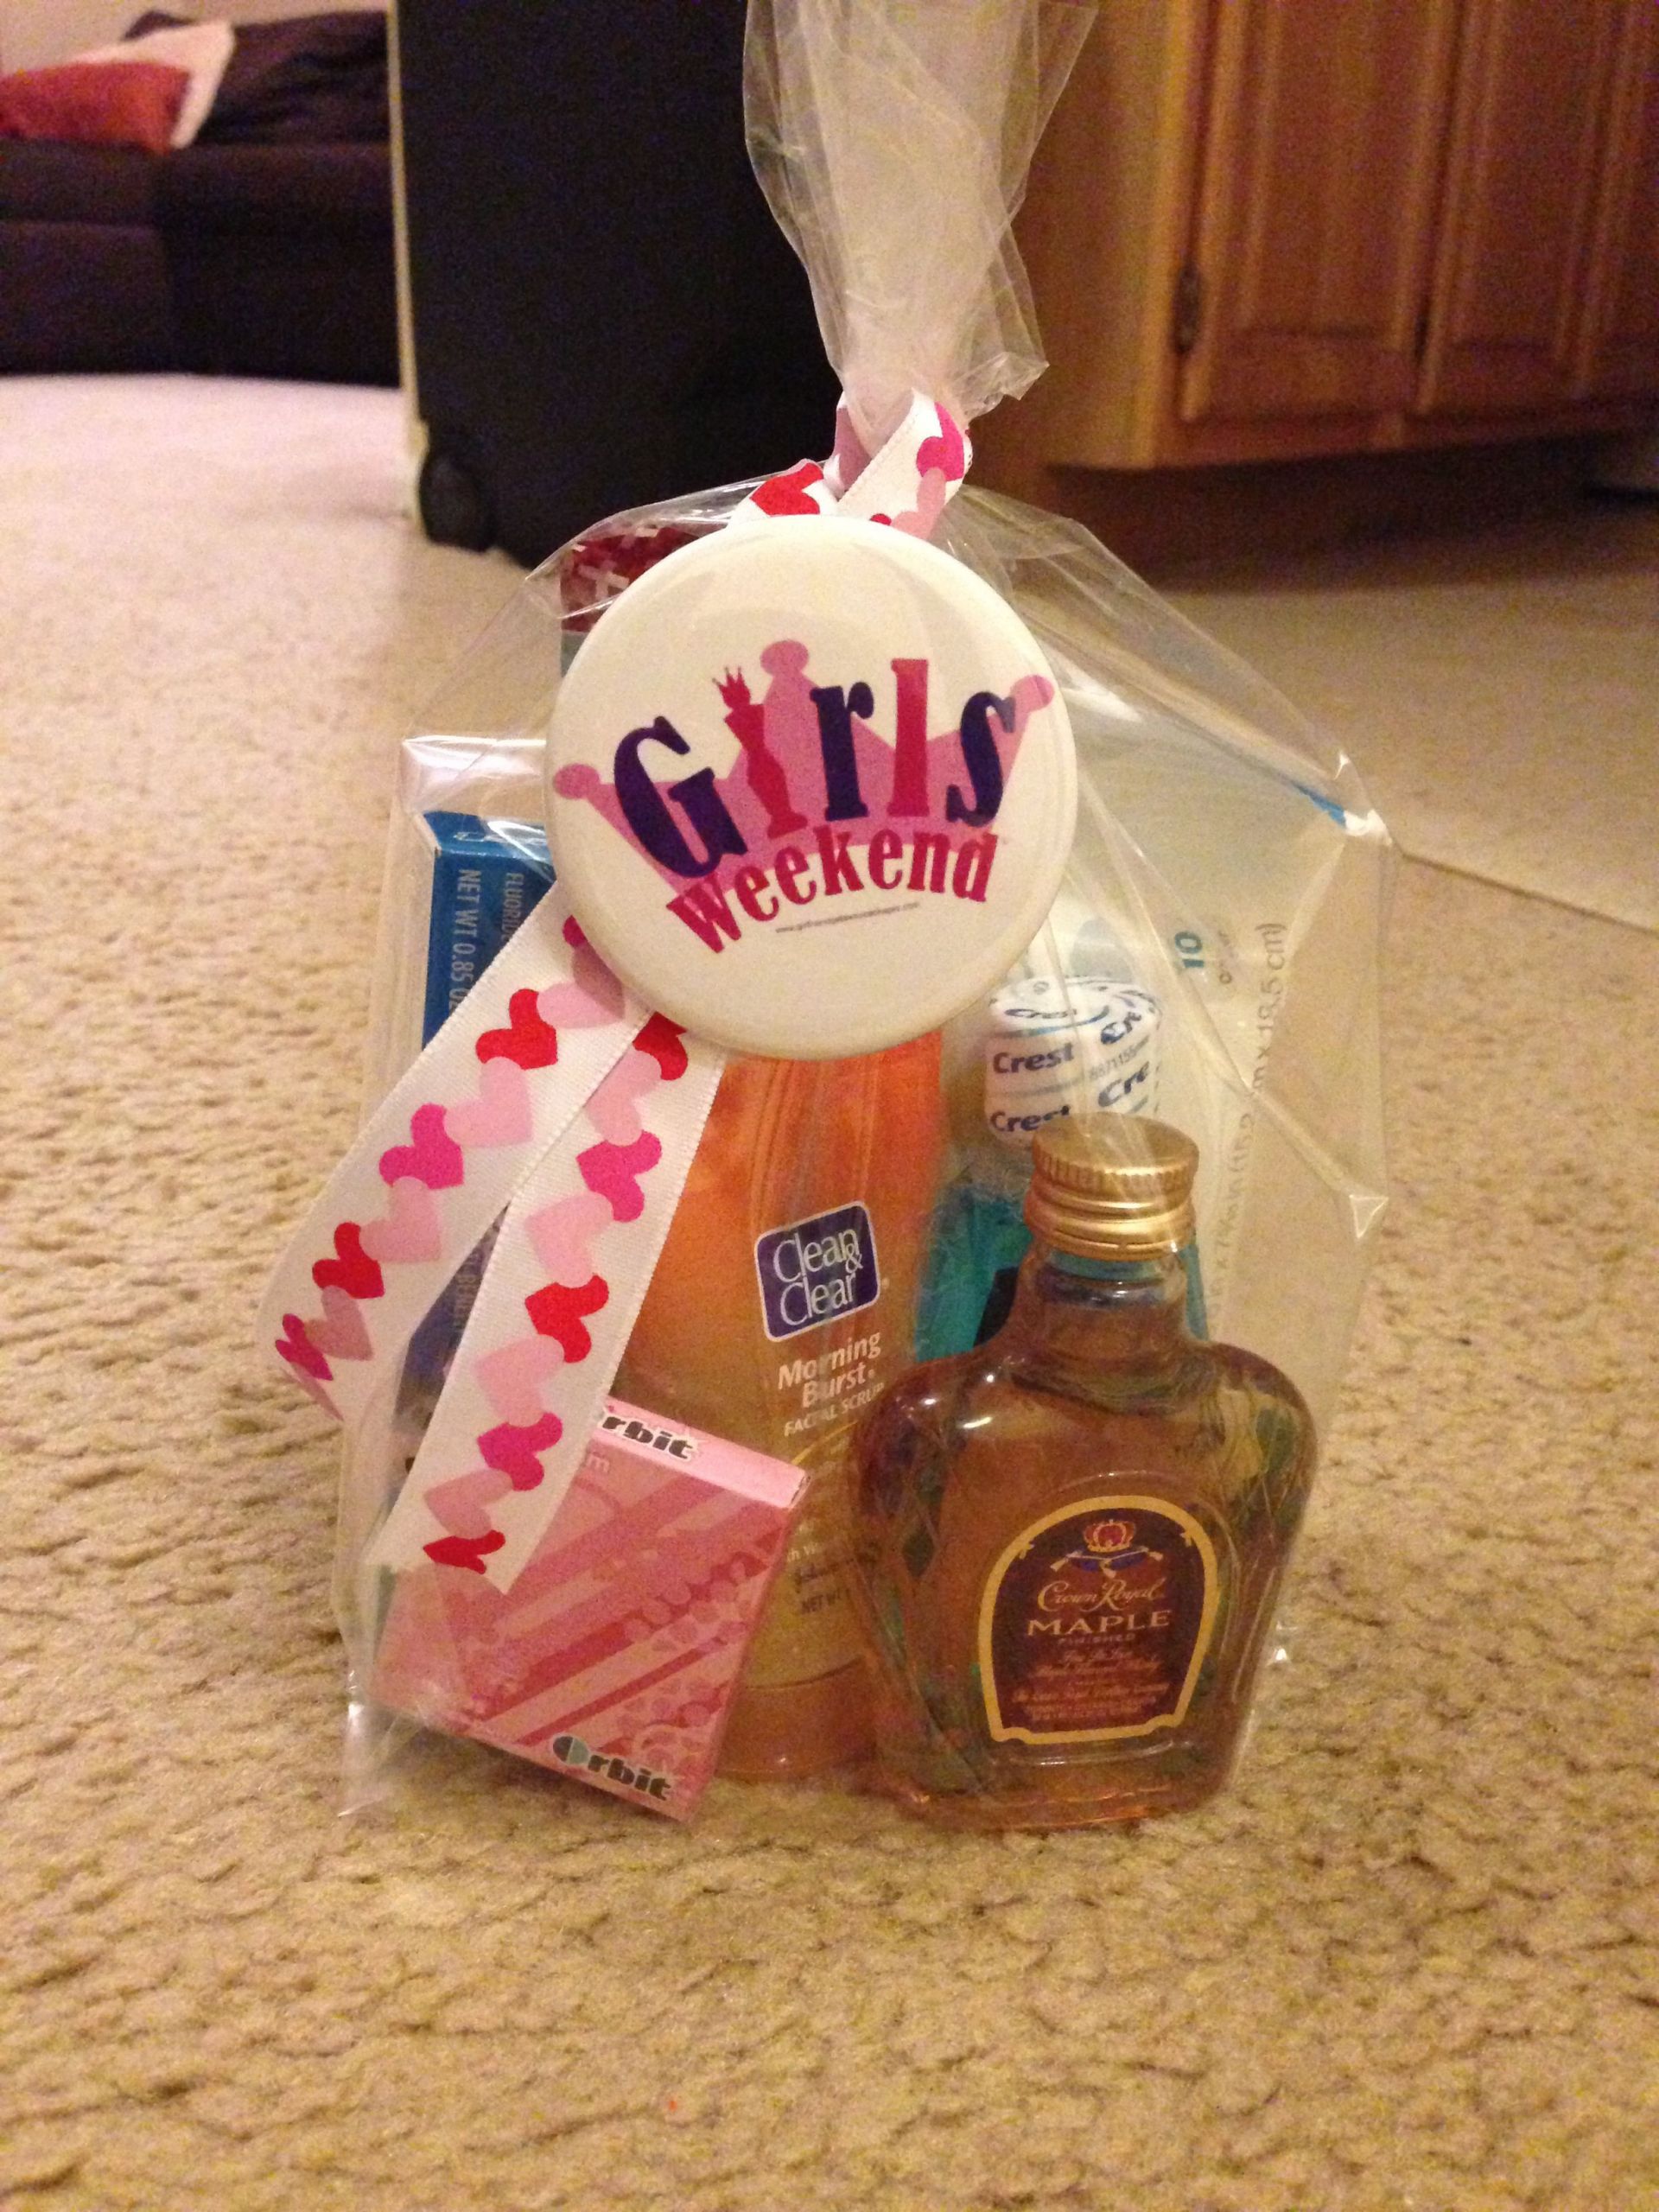 Girls Weekend Gift Bag Ideas
 Pin by TeeTee Williams on Creative ideas for events